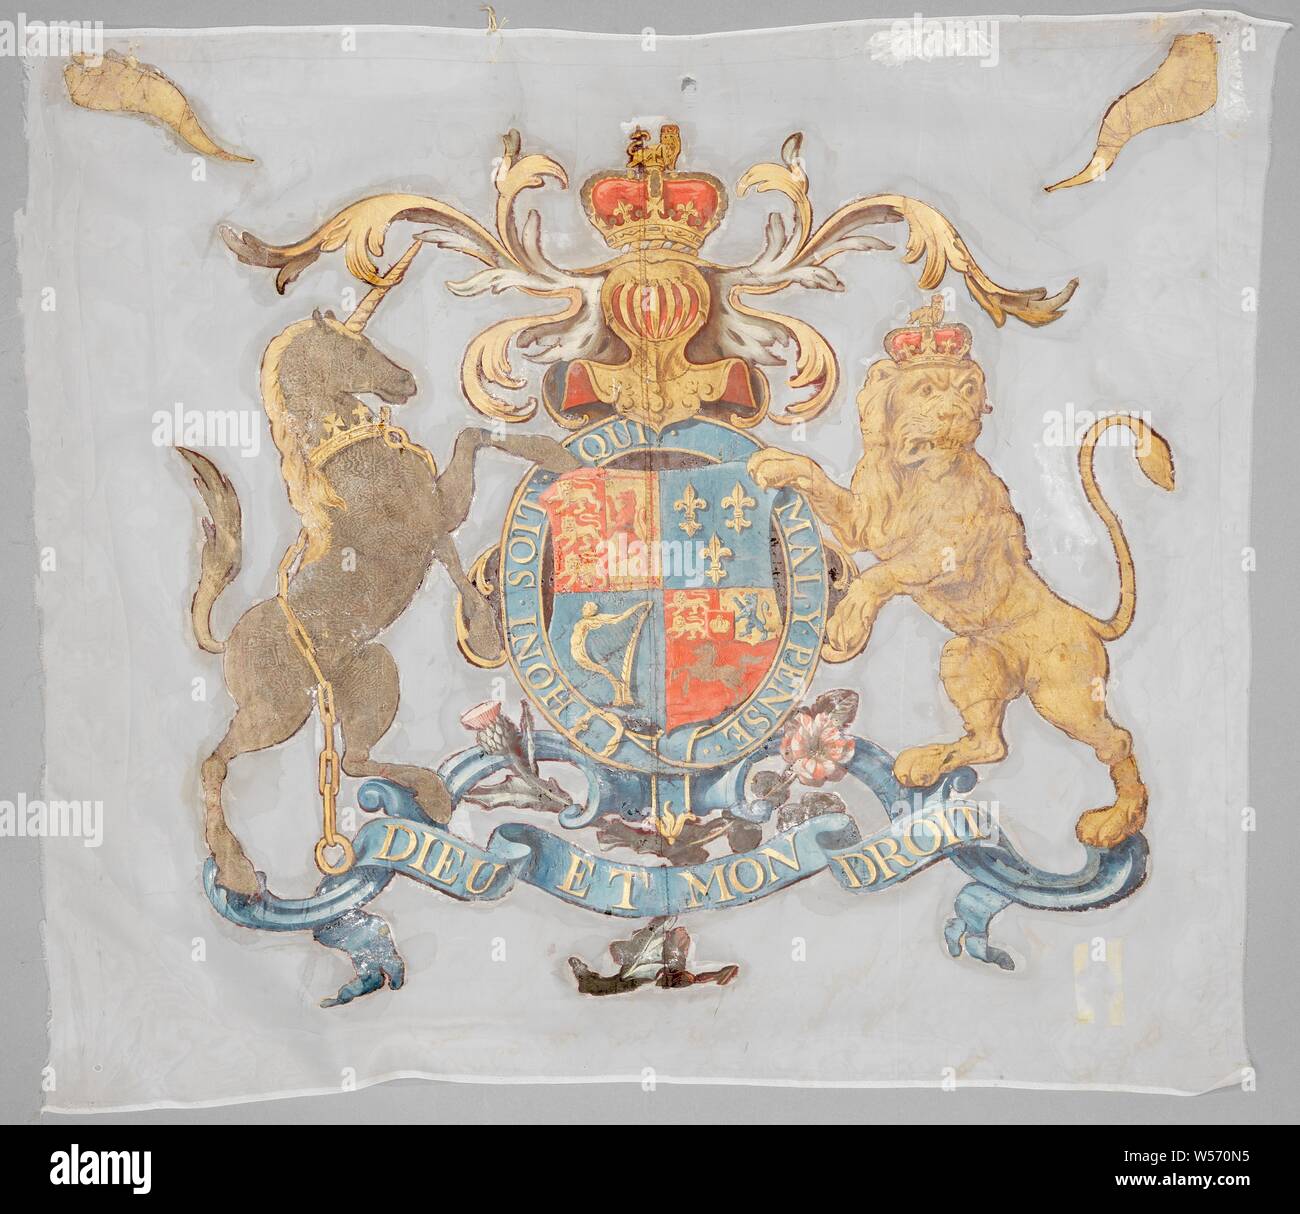 Banner of one of the Scottish regiments, Red, in the center the coat of arms of the king of England-Hannover, surrounded by the Order of the Garter, held by a crowned-looking leopard, and a unicorn with a golden crown around its neck, on which a golden chain depends (symbol of England and Scotland respectively). Above it a helmet with a closed visor, on which a crown with three beaded braces and a lying leopard on it (helmet sign of England). The helmet is surrounded by symmetrical decorative foliage that extends above the wearers. Below the weapon is a symmetrical cartouche Stock Photo